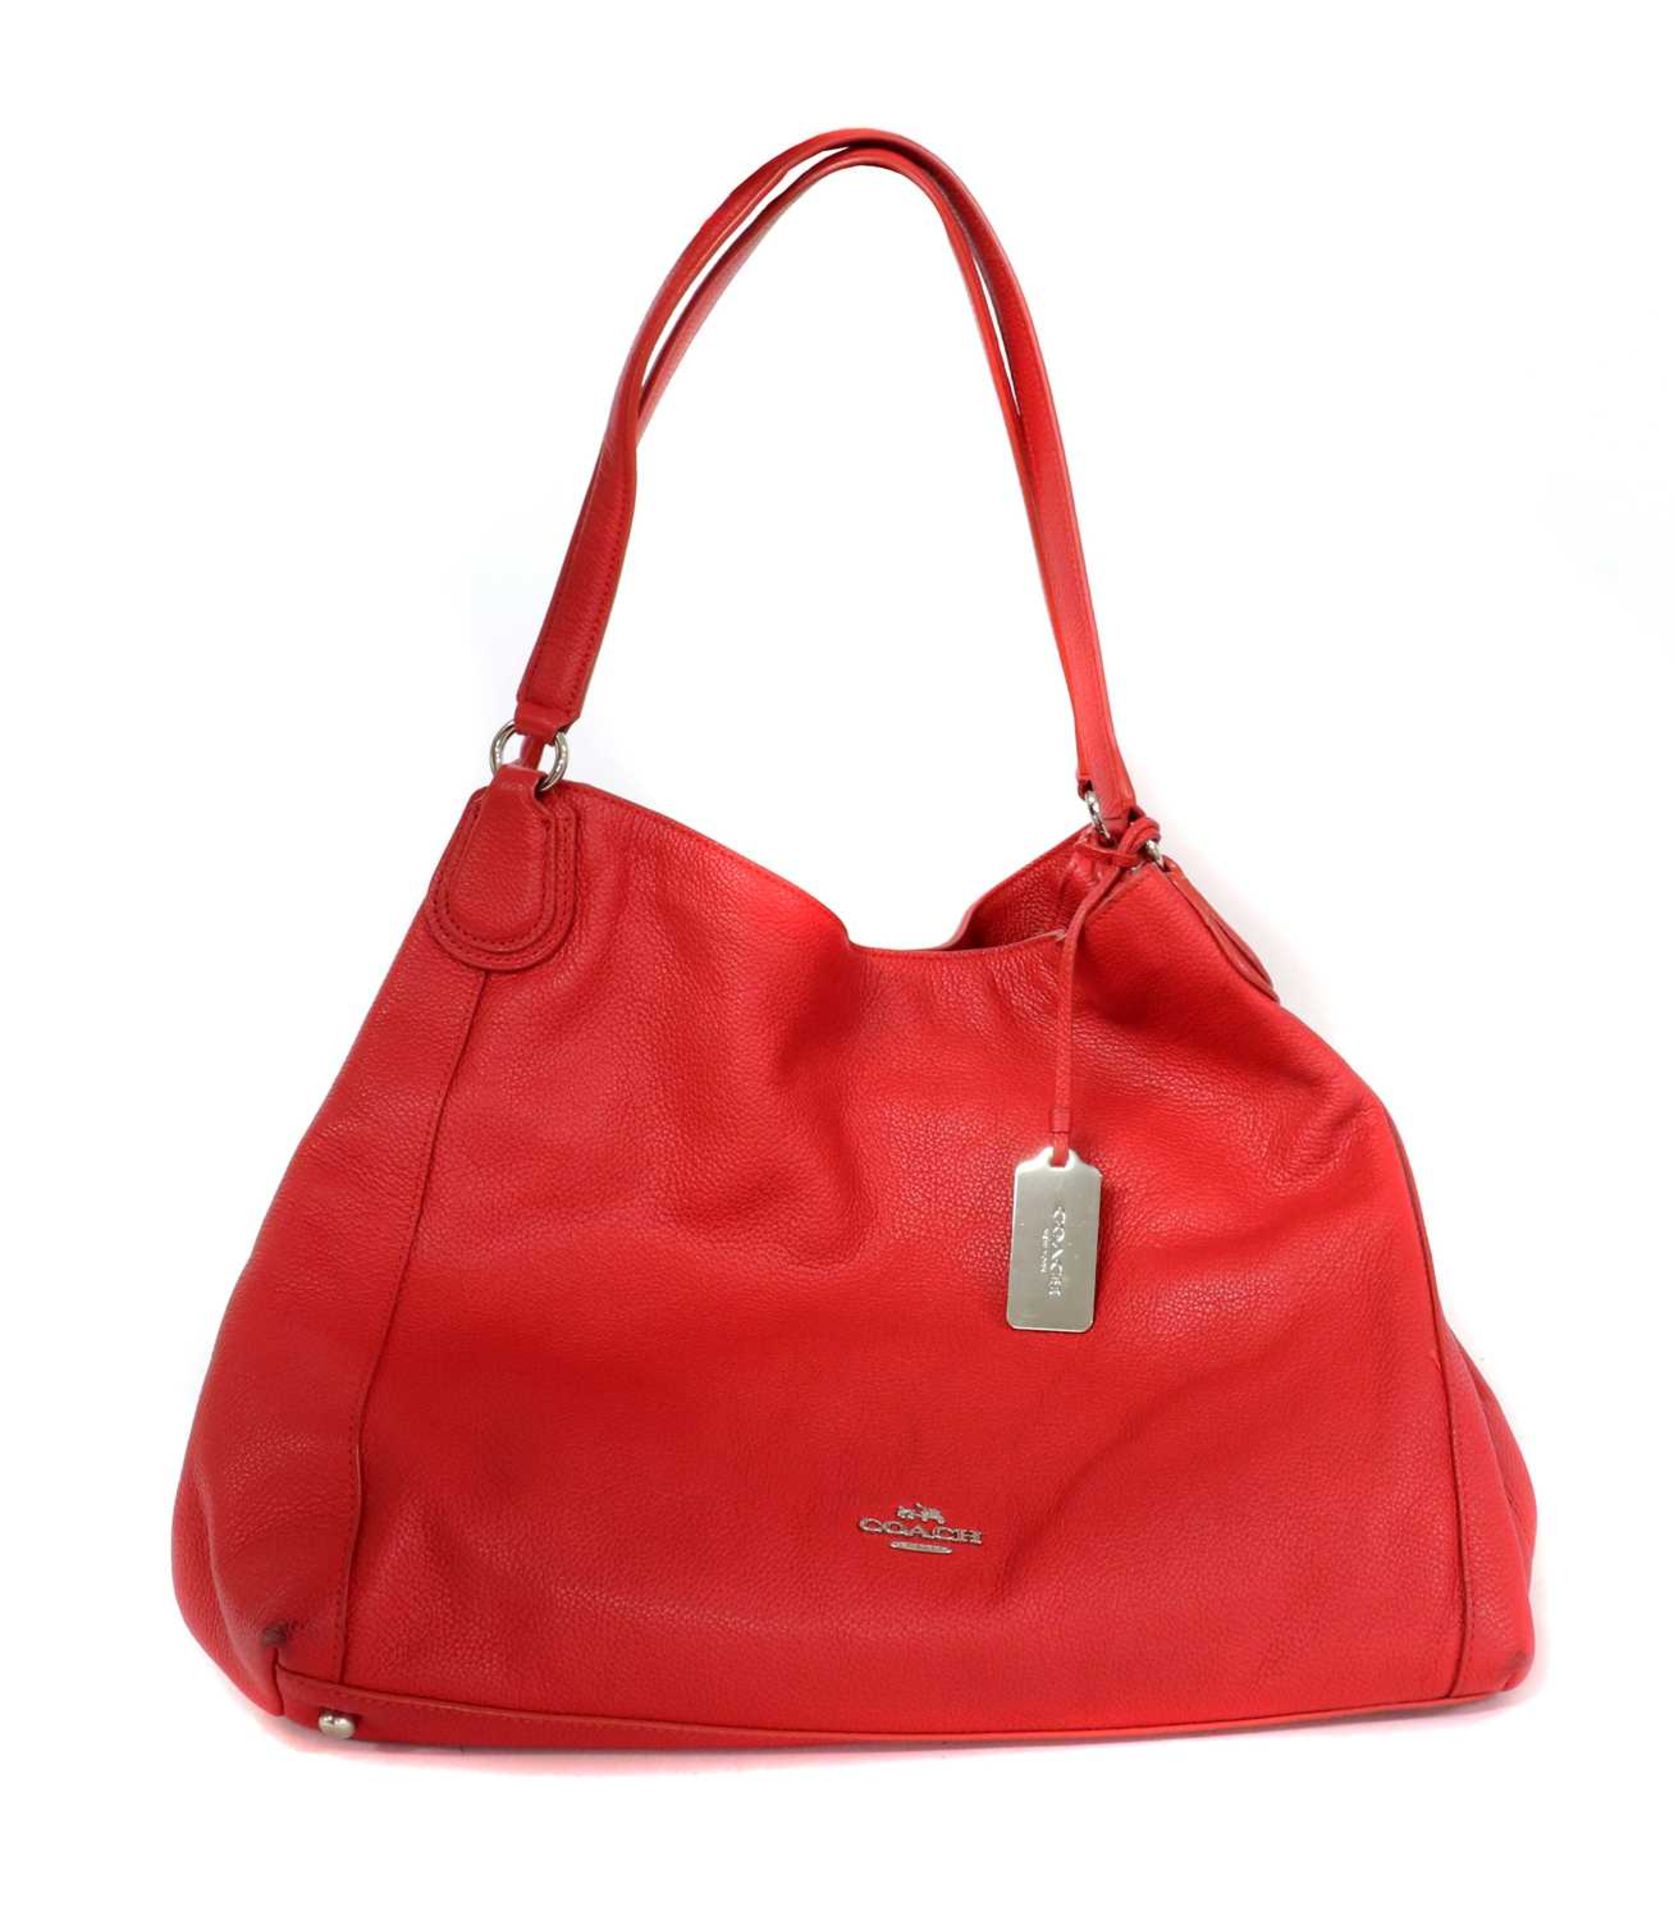 A Coach red leather Edie bag,